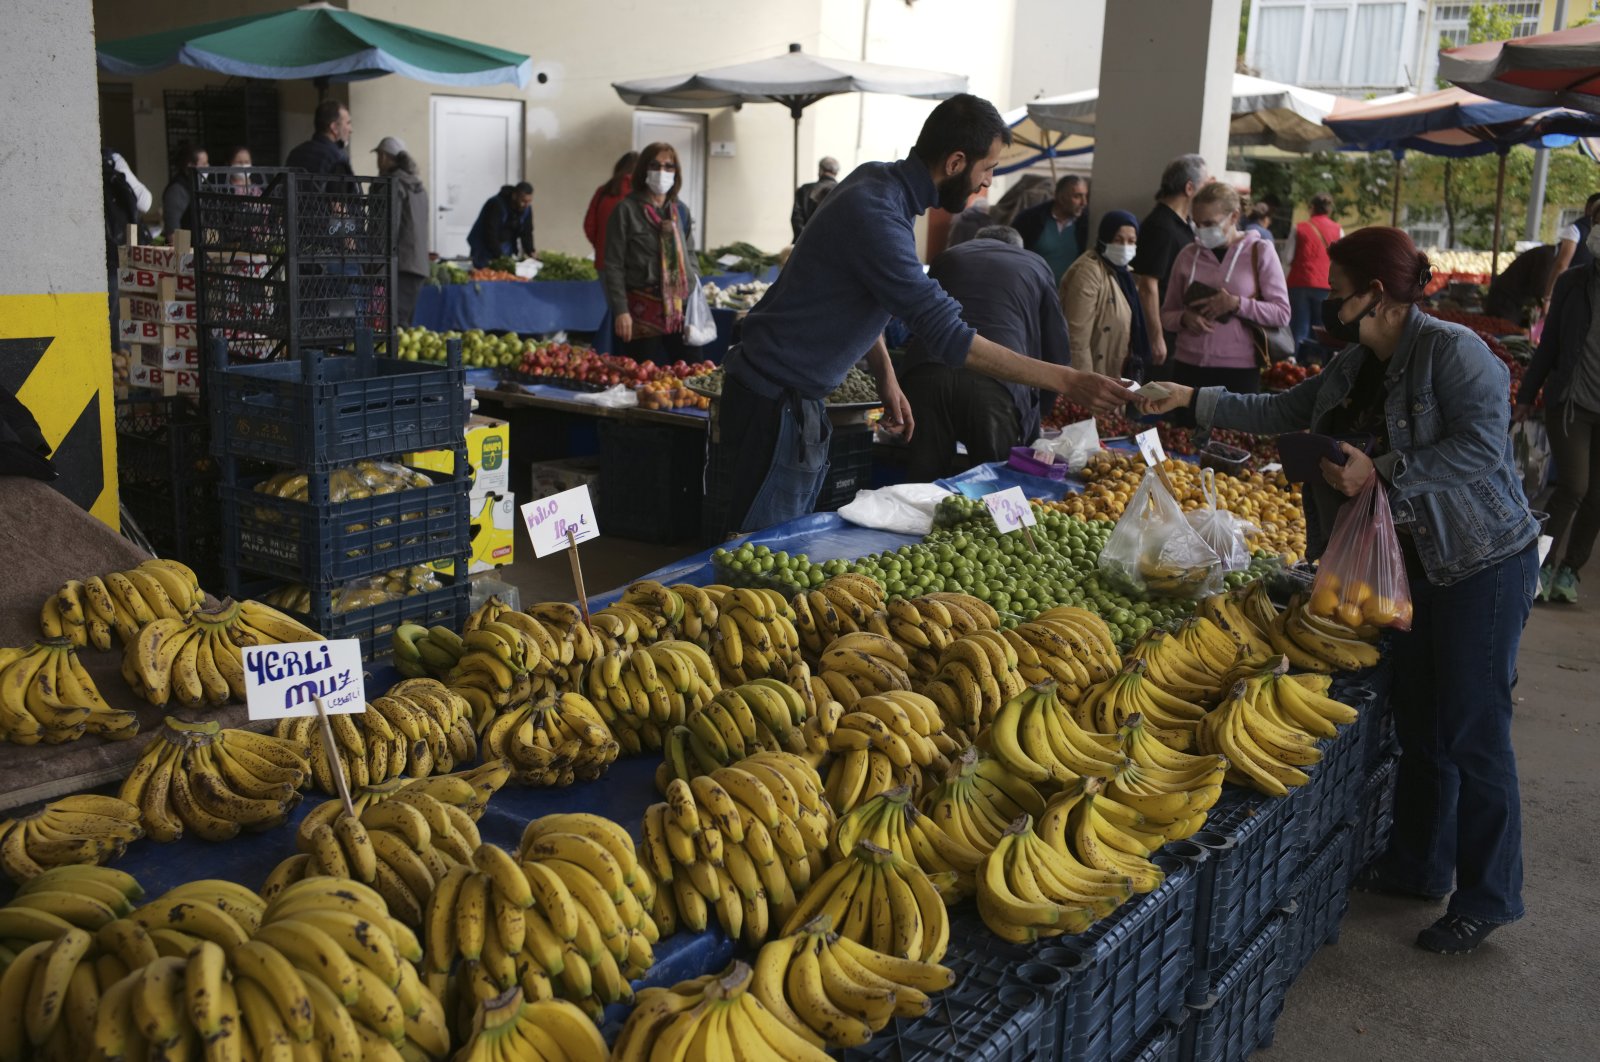 People buy local products at a food market, in the capital Ankara, Turkey, May 8, 2022. (AP Photo)